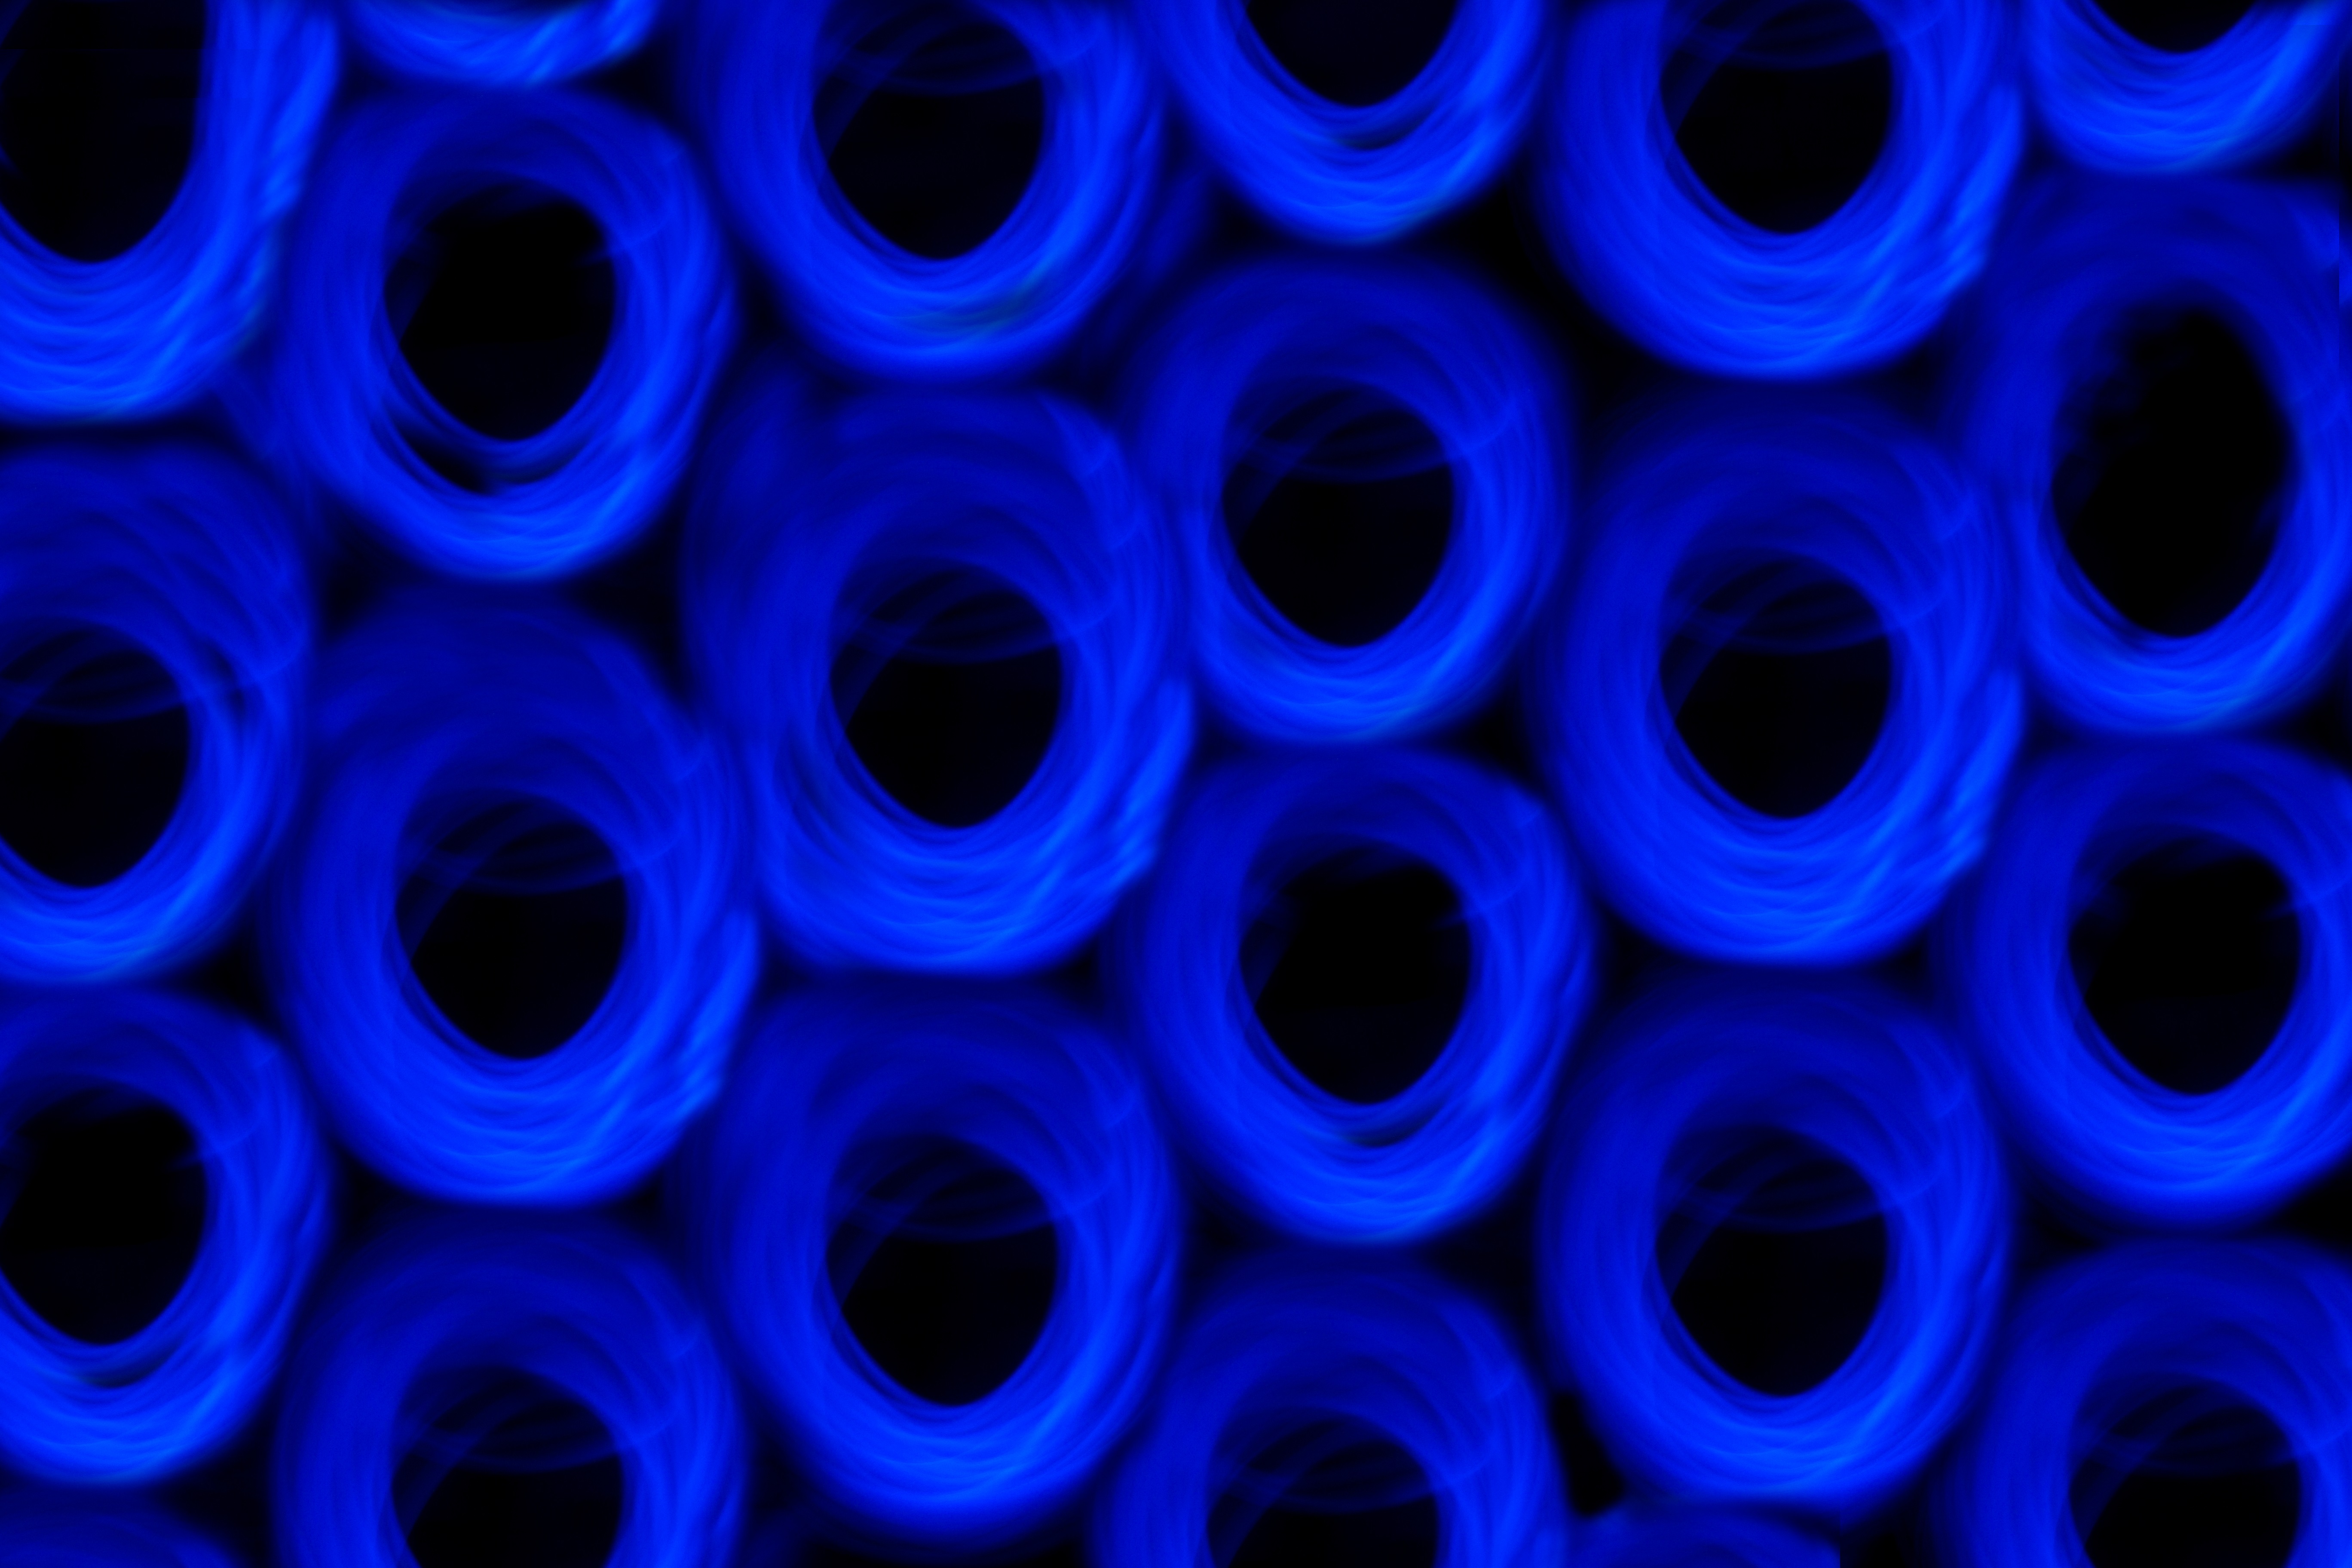 Abstract Lights Blue Pattern Texture Plastic Dark Hole Industrial 5472x3648